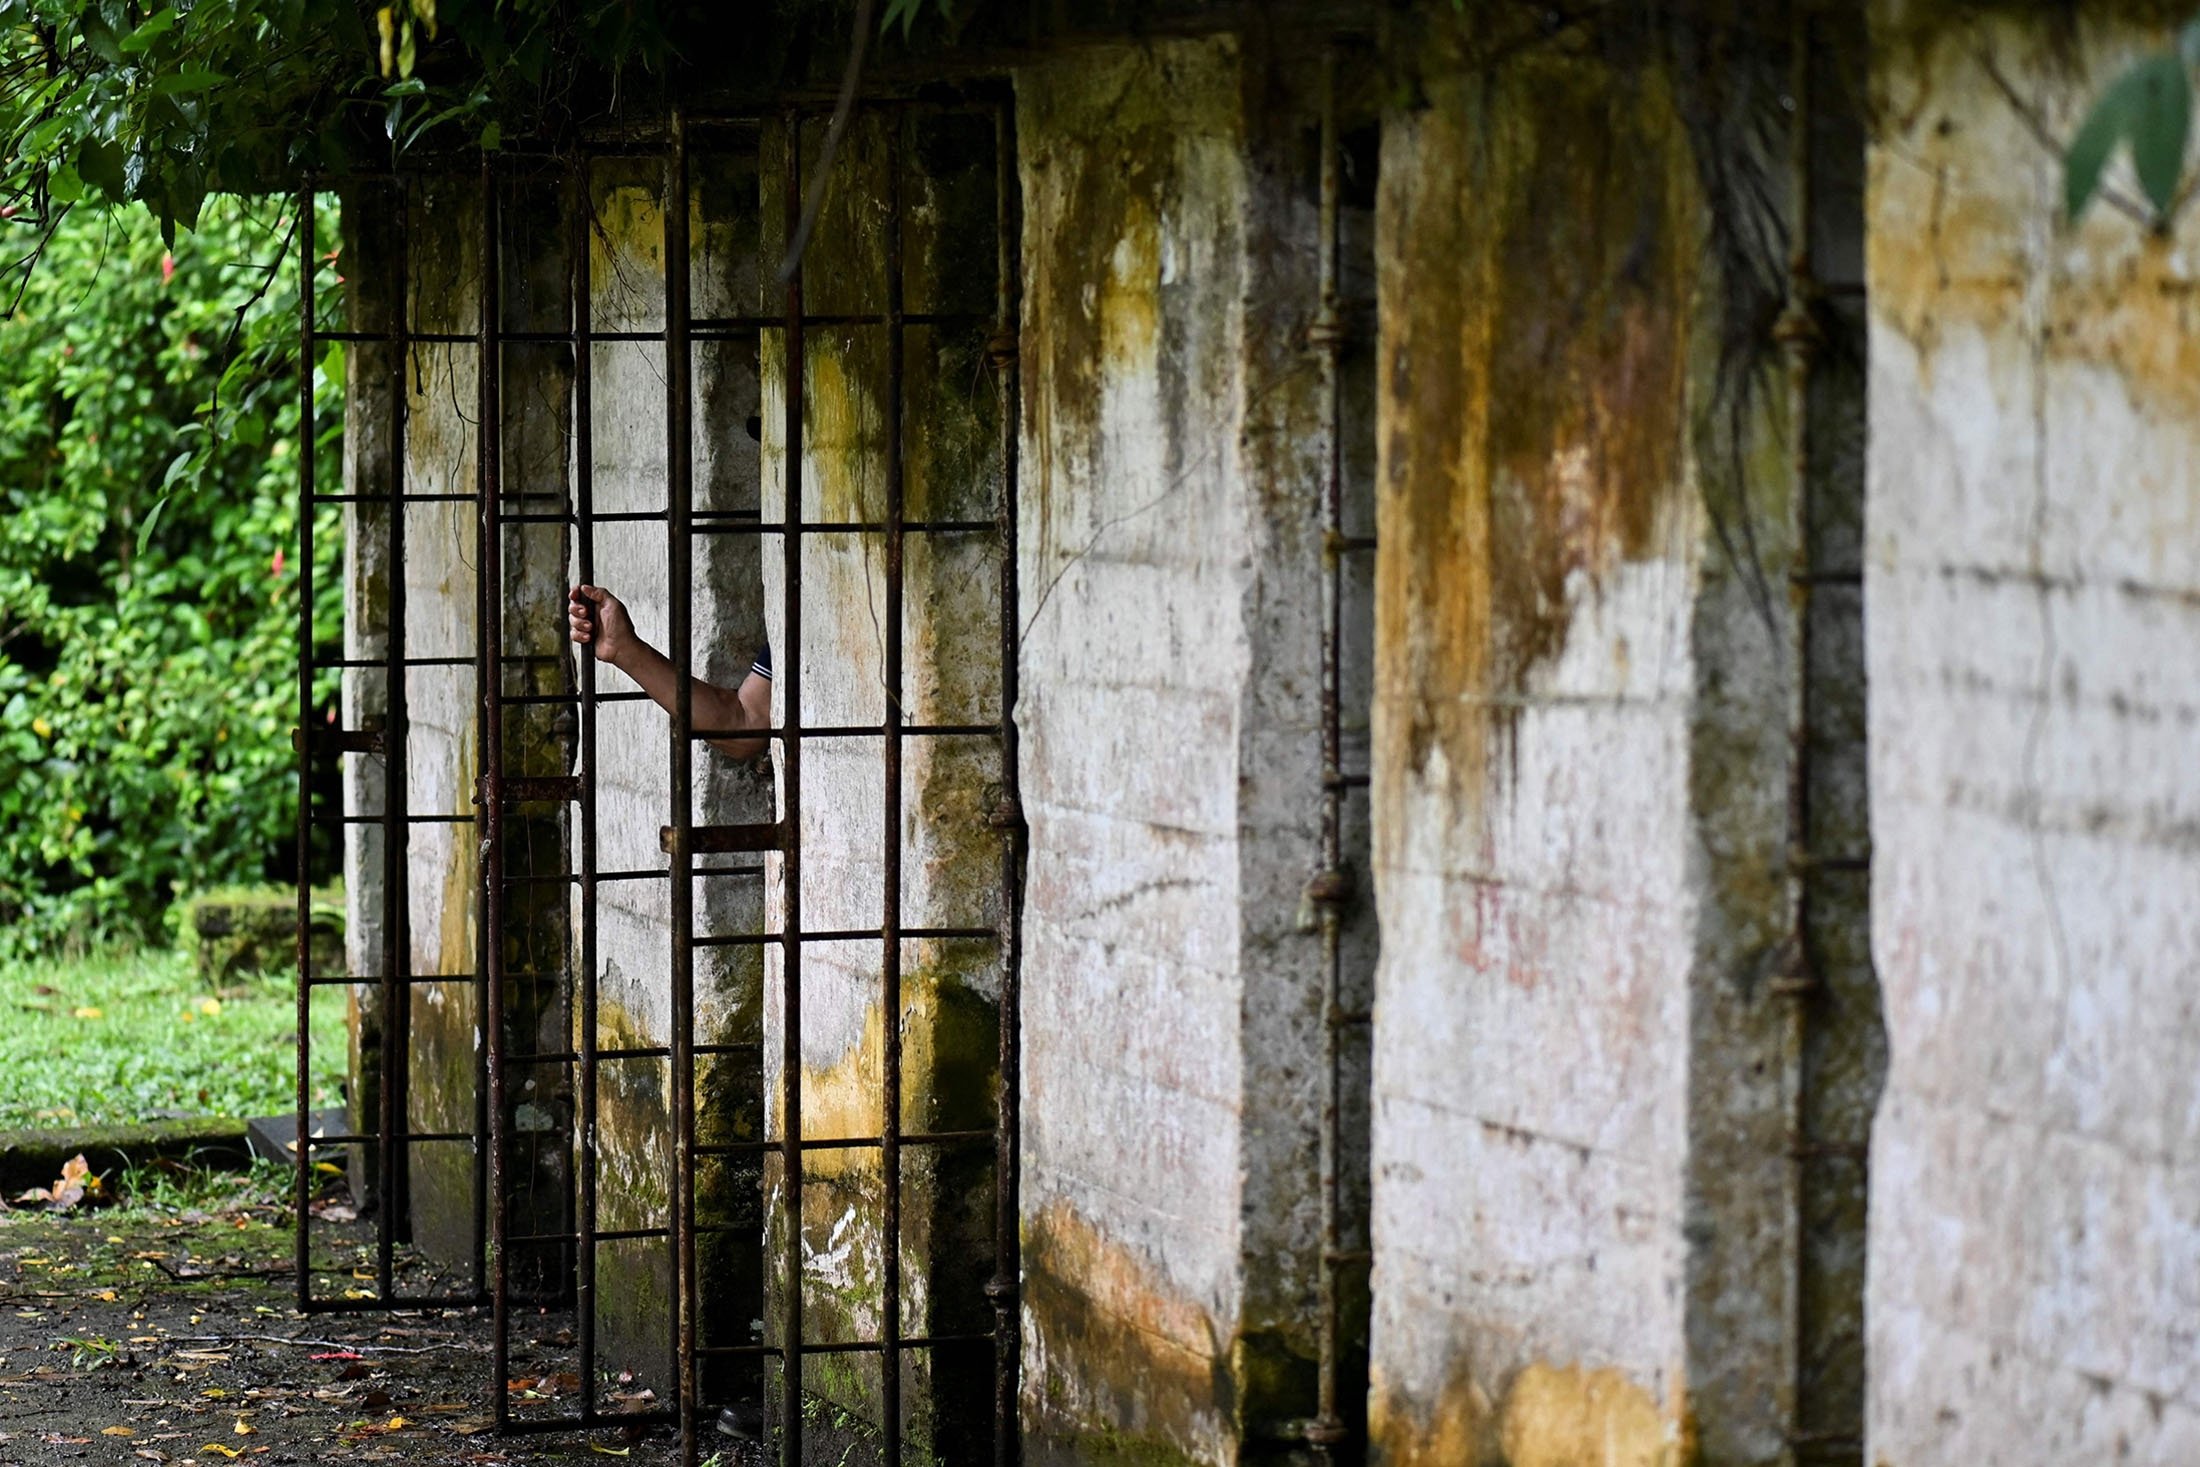 A tourist steps out of a cell at what was the prison at Gorgona Island, in the Pacific Ocean, off southwestern Colombia, Dec. 1, 2021. (AFP Photo)